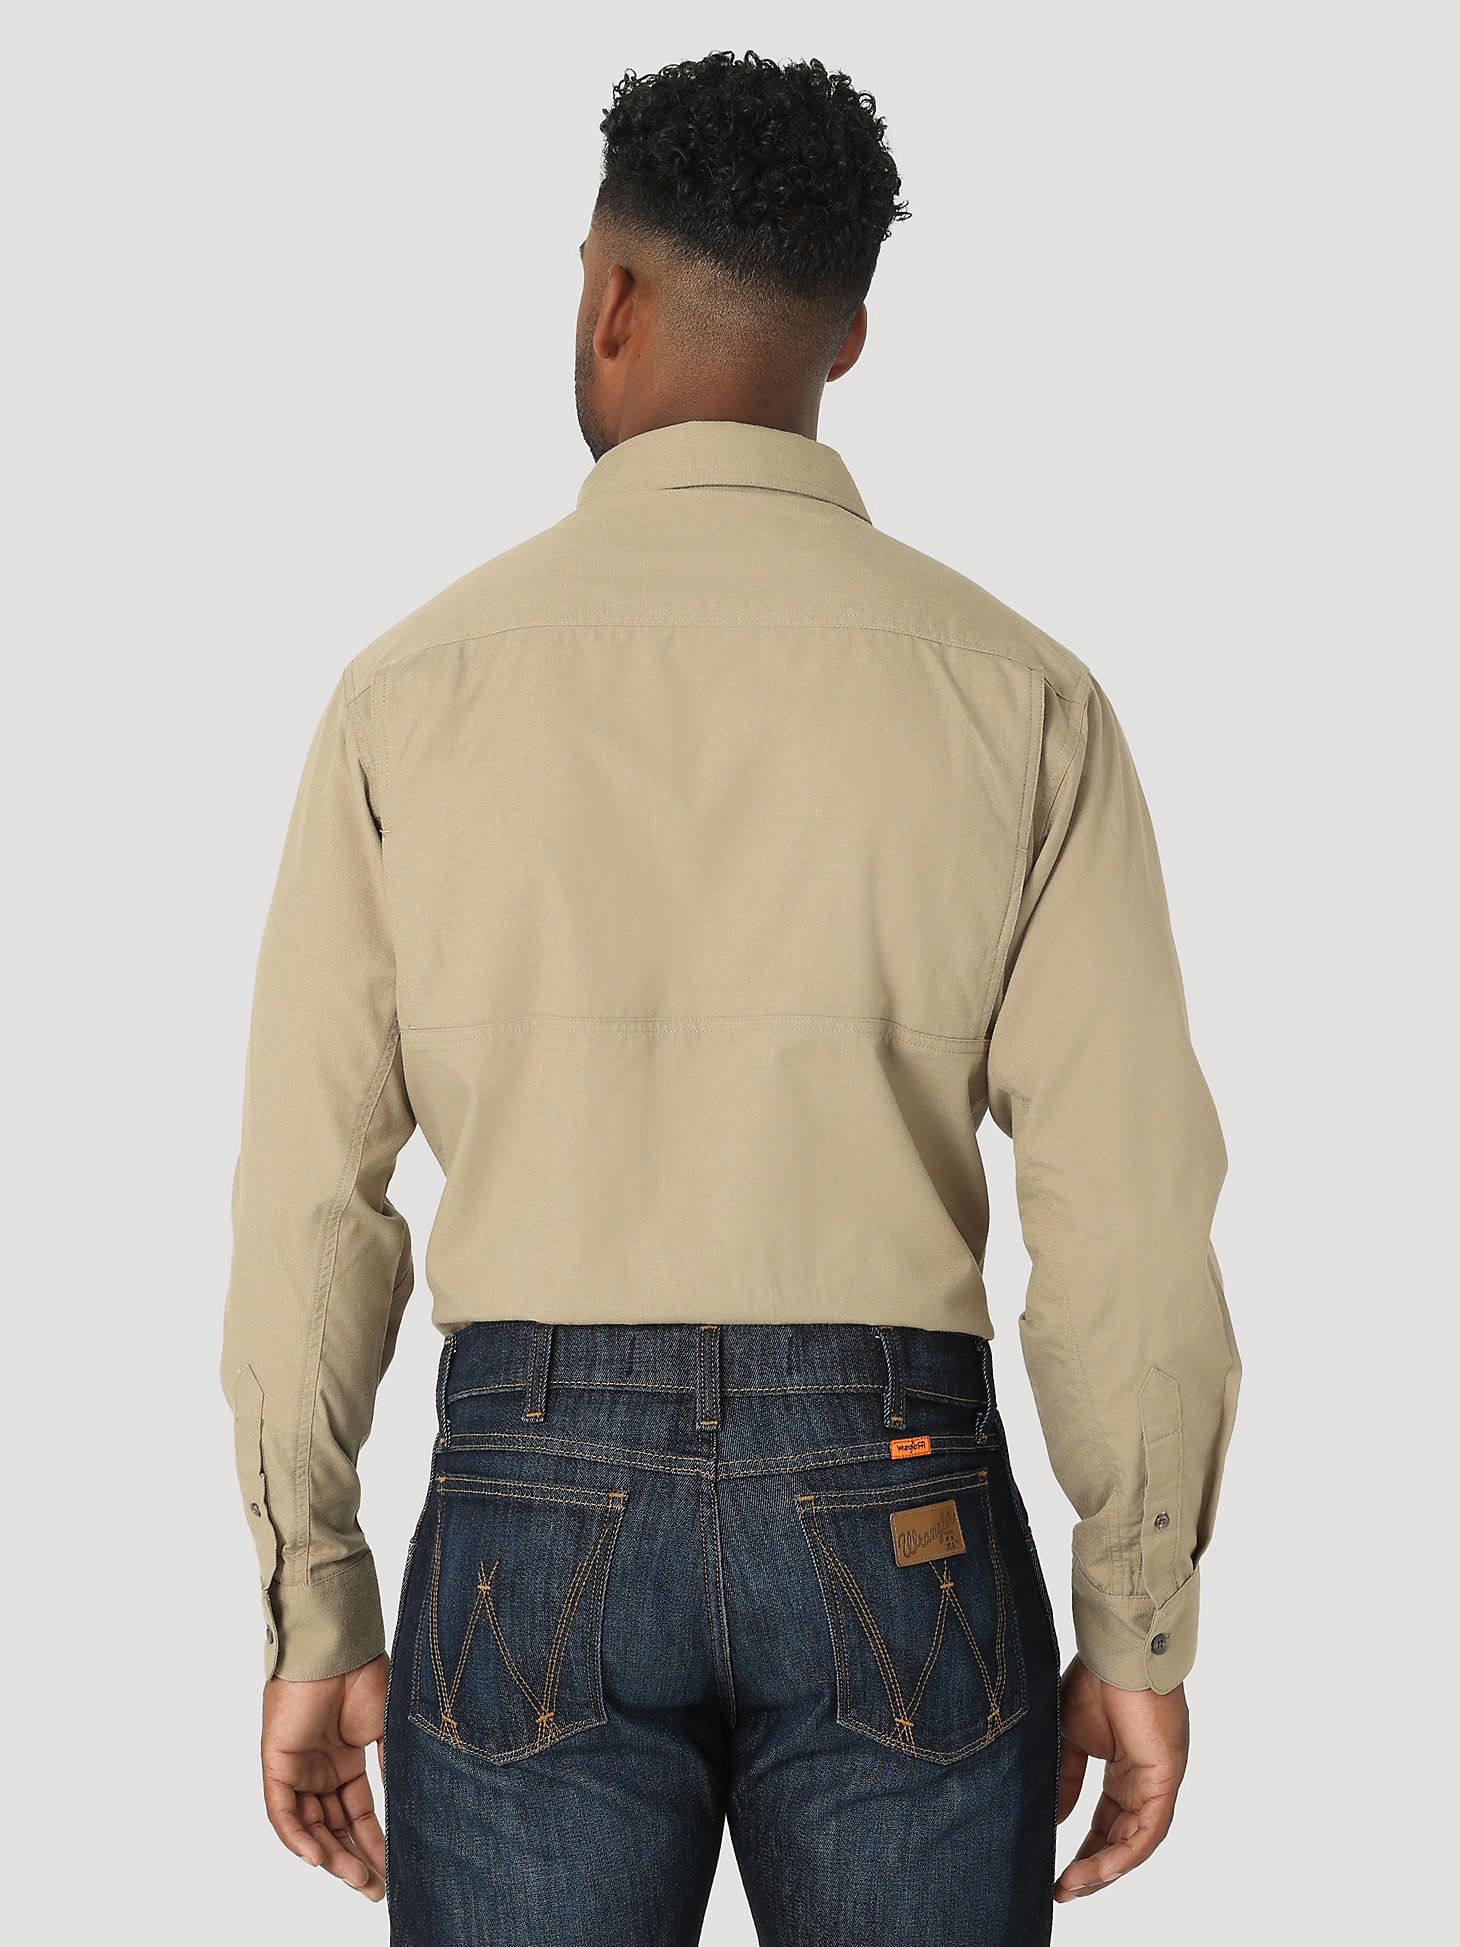 FR Flame Resistant 20X Long Sleeve Vented Work Shirt in Khaki alternative view 1